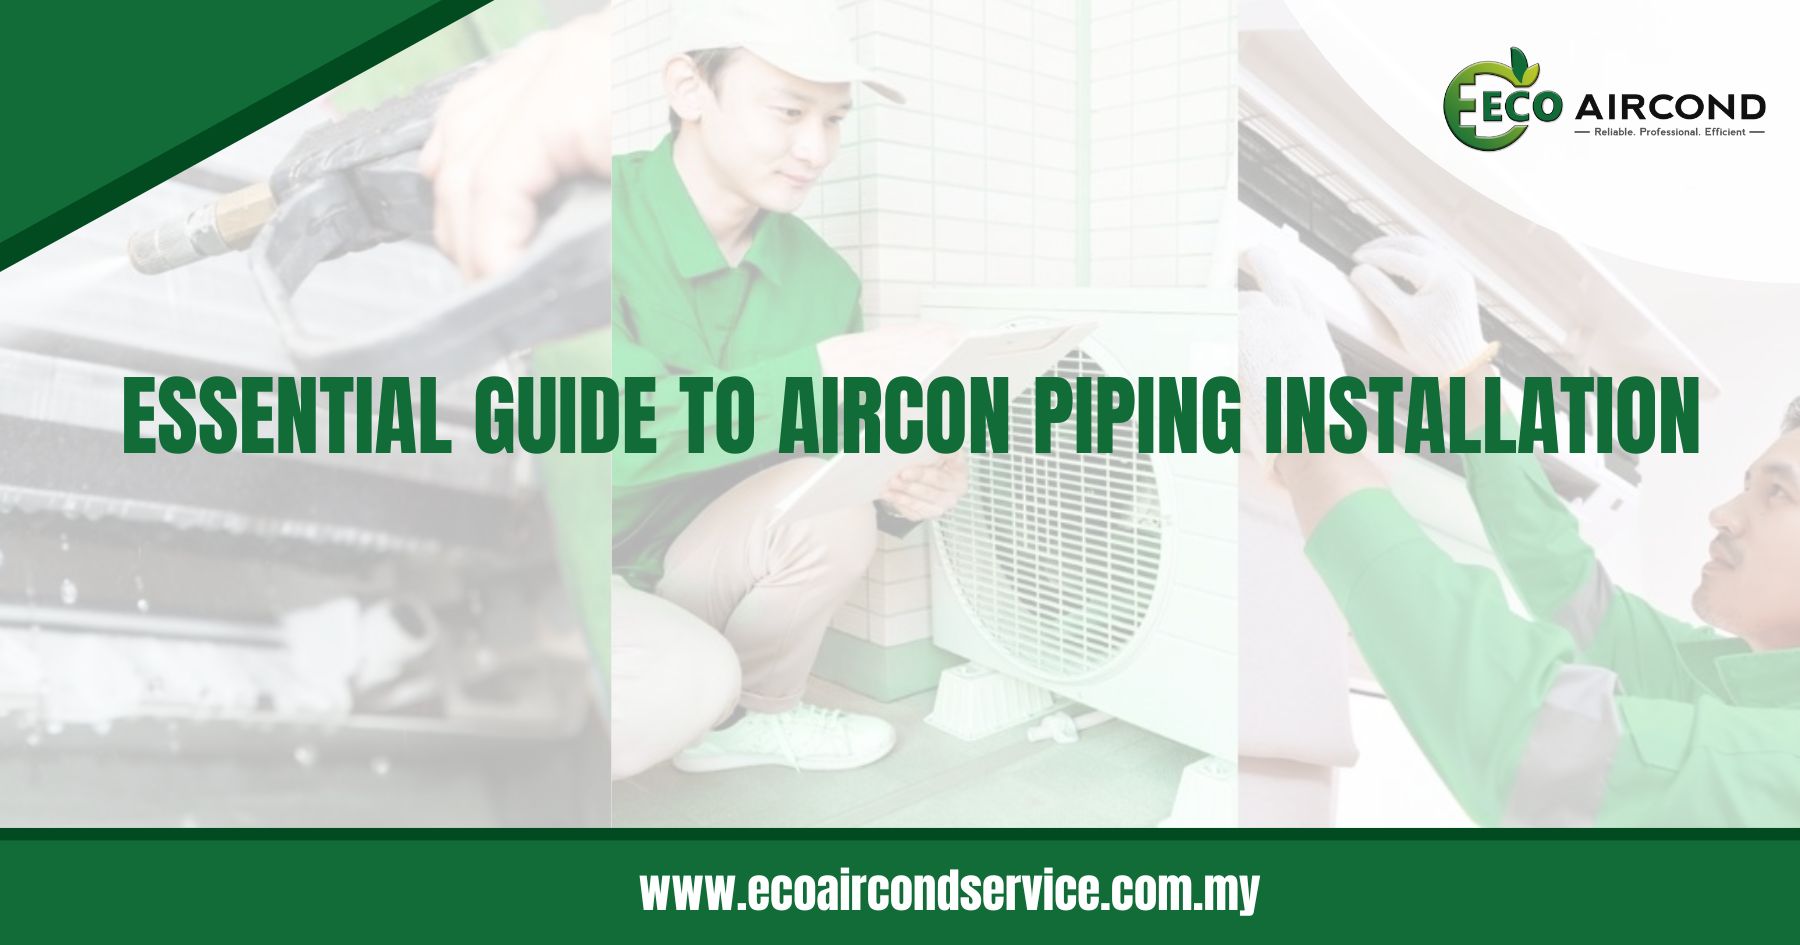 Essential Guide to Aircon Piping Installation